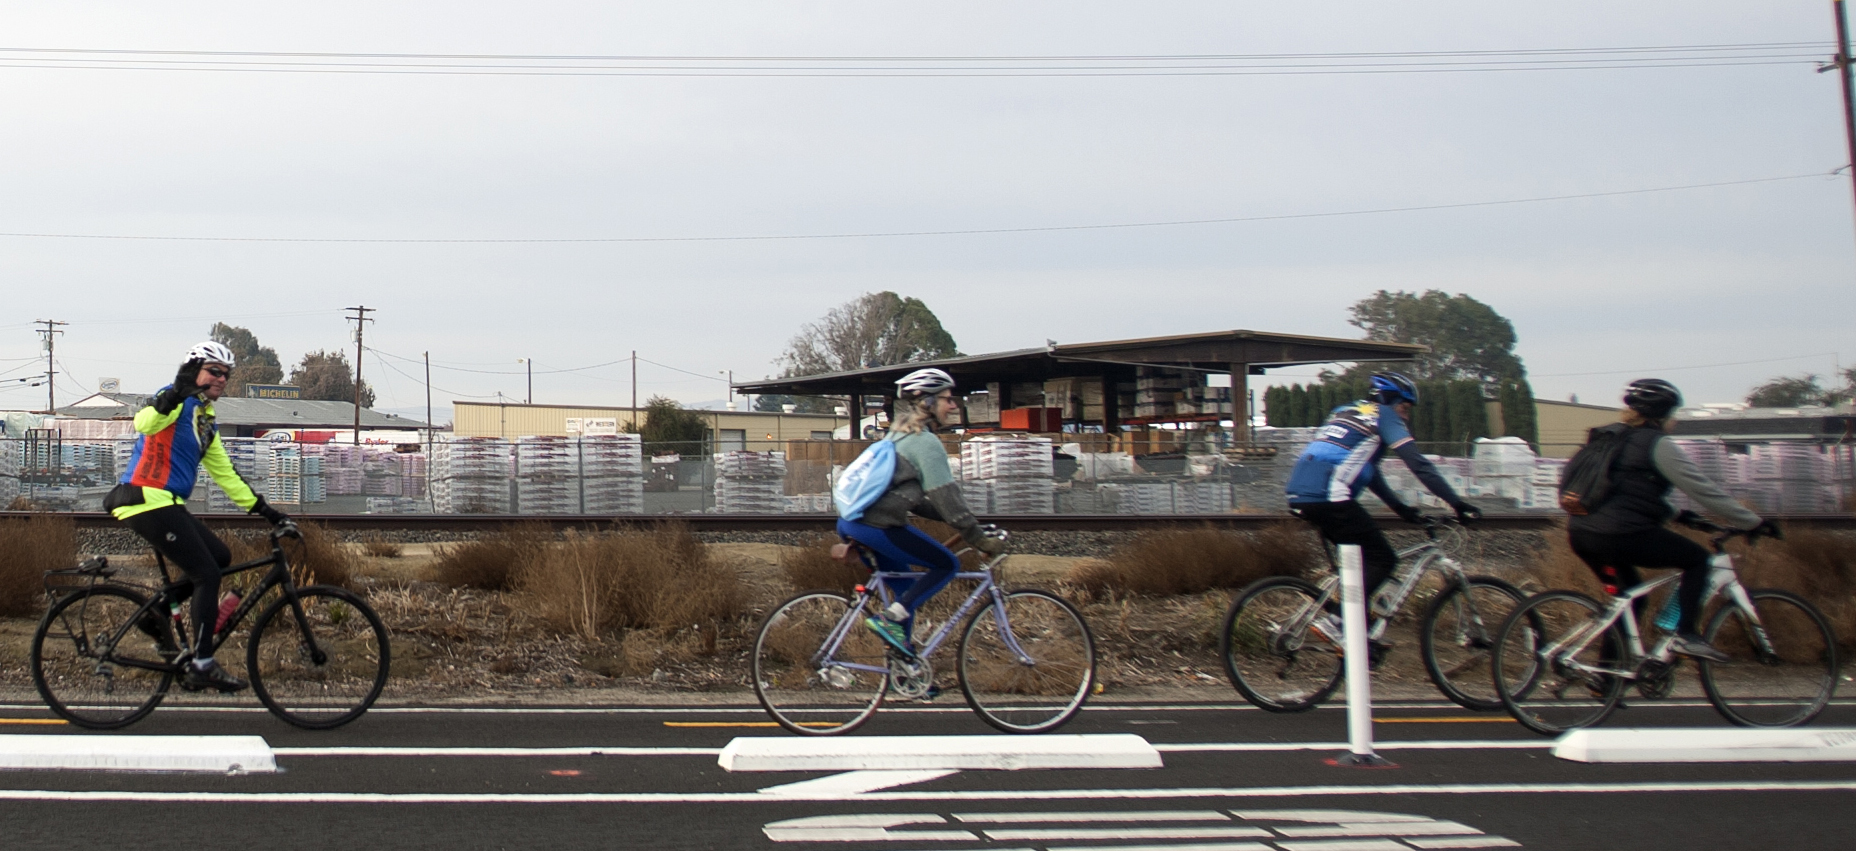 Stanislaus County Bicycle Club members ride down the curb-protected, two-way bike lane that connects the two campuses of Modesto Junior College. Photo: Minerva Perez